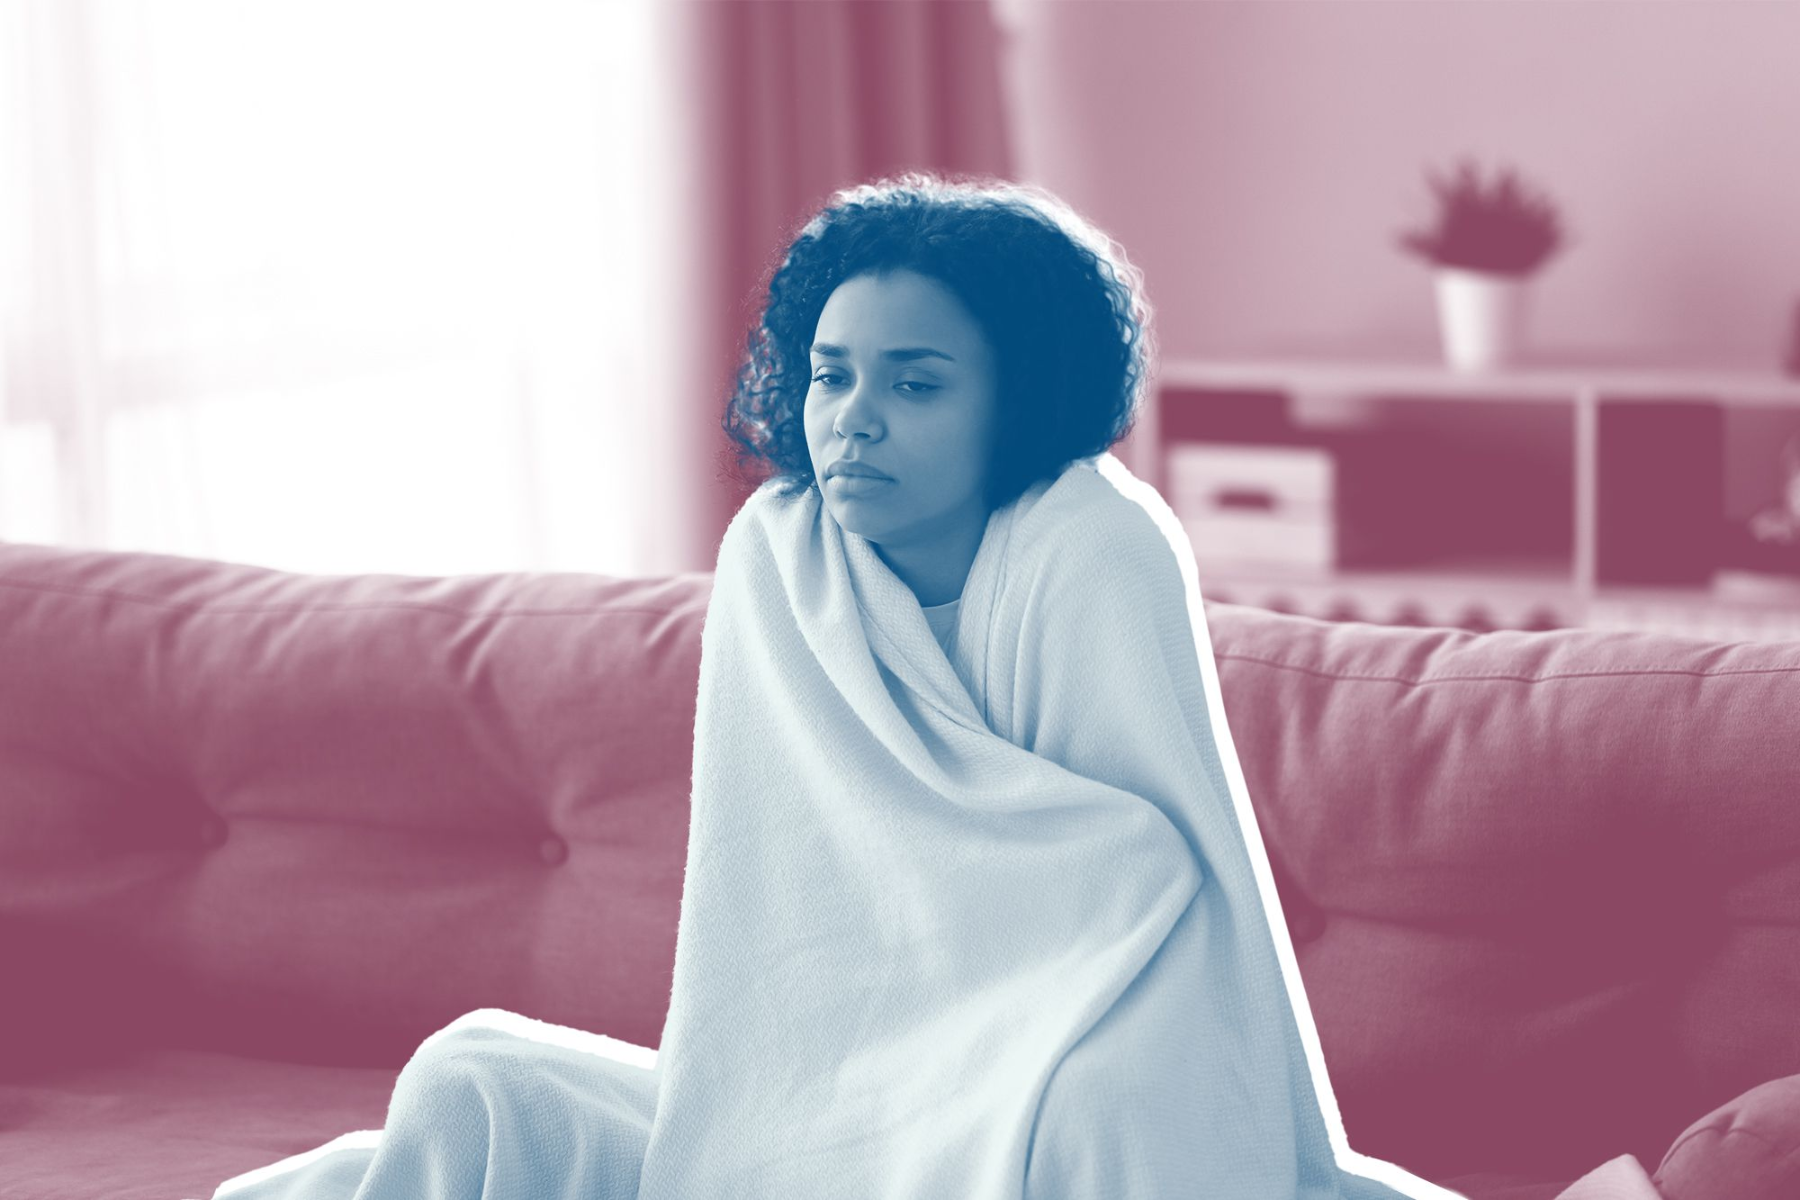 A woman who has a blue effect on her blanket becomes cold